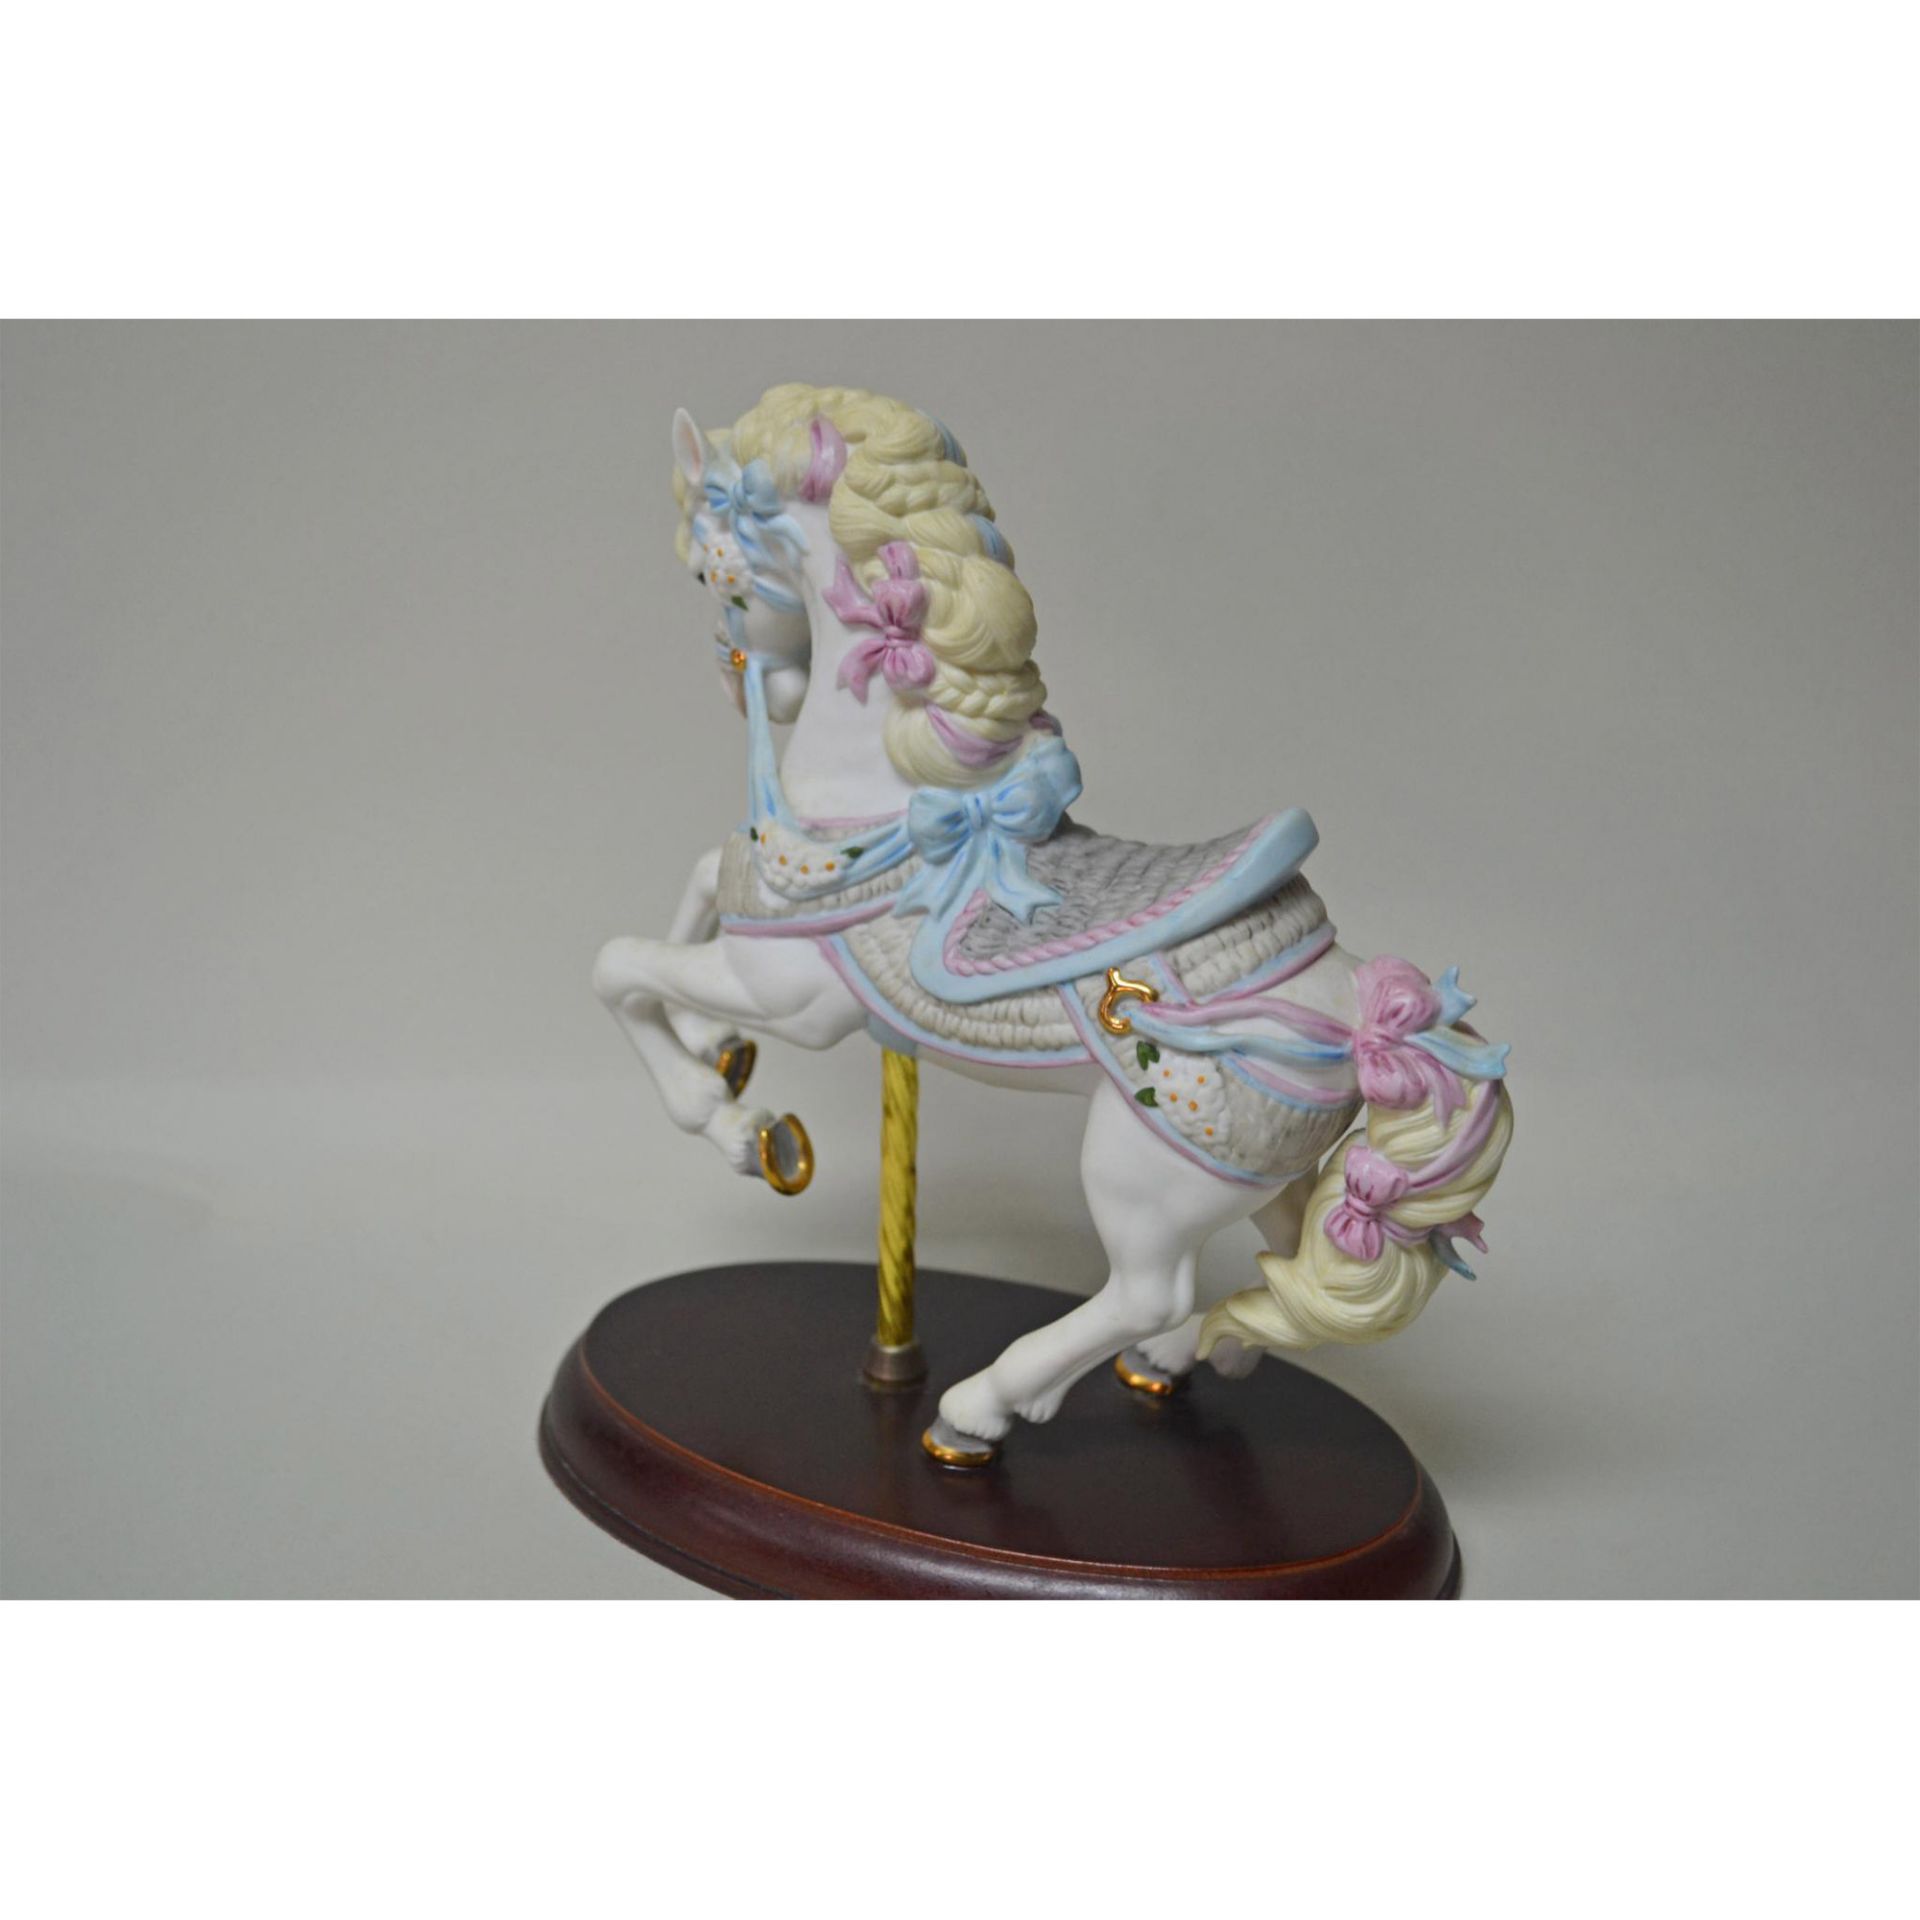 Lenox Vintage 1990 Carousel Horse Charger Figurine - Image 3 of 5